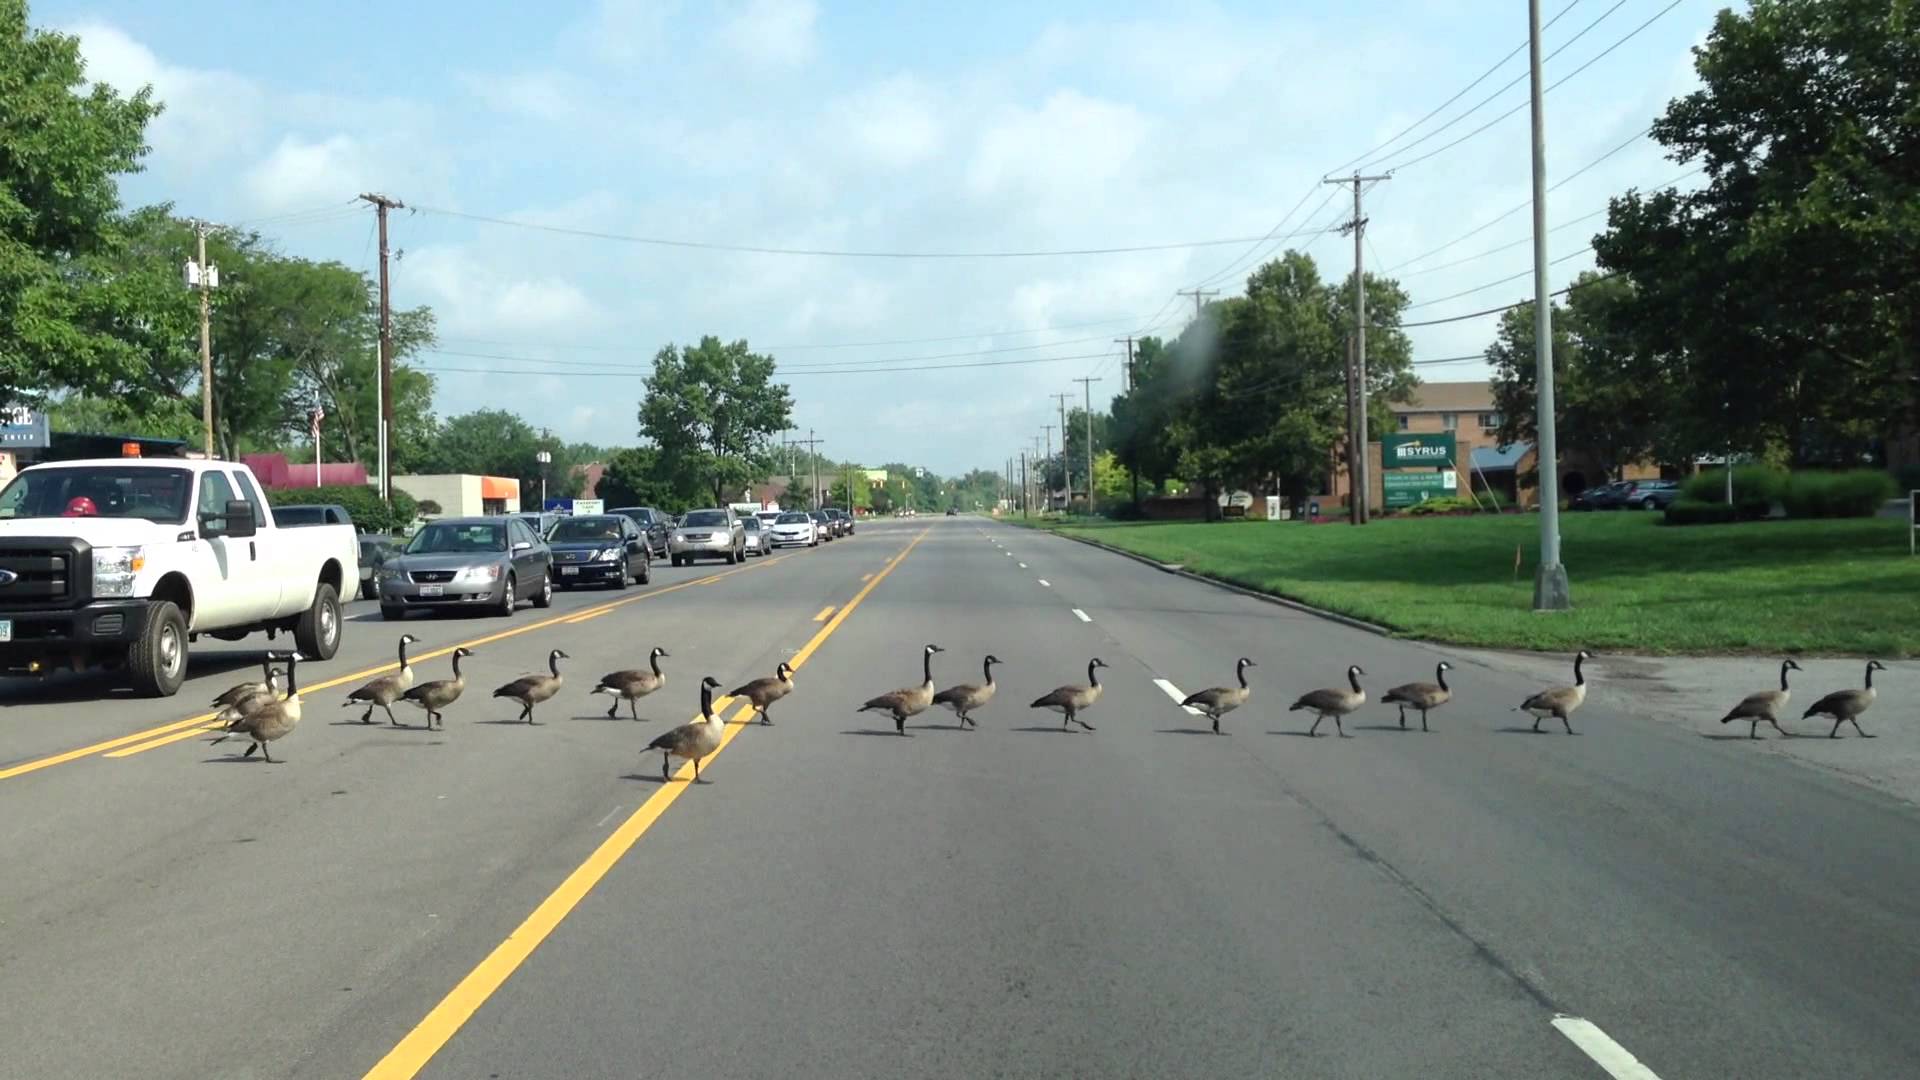 072313 Geese crossing the road - YouTube